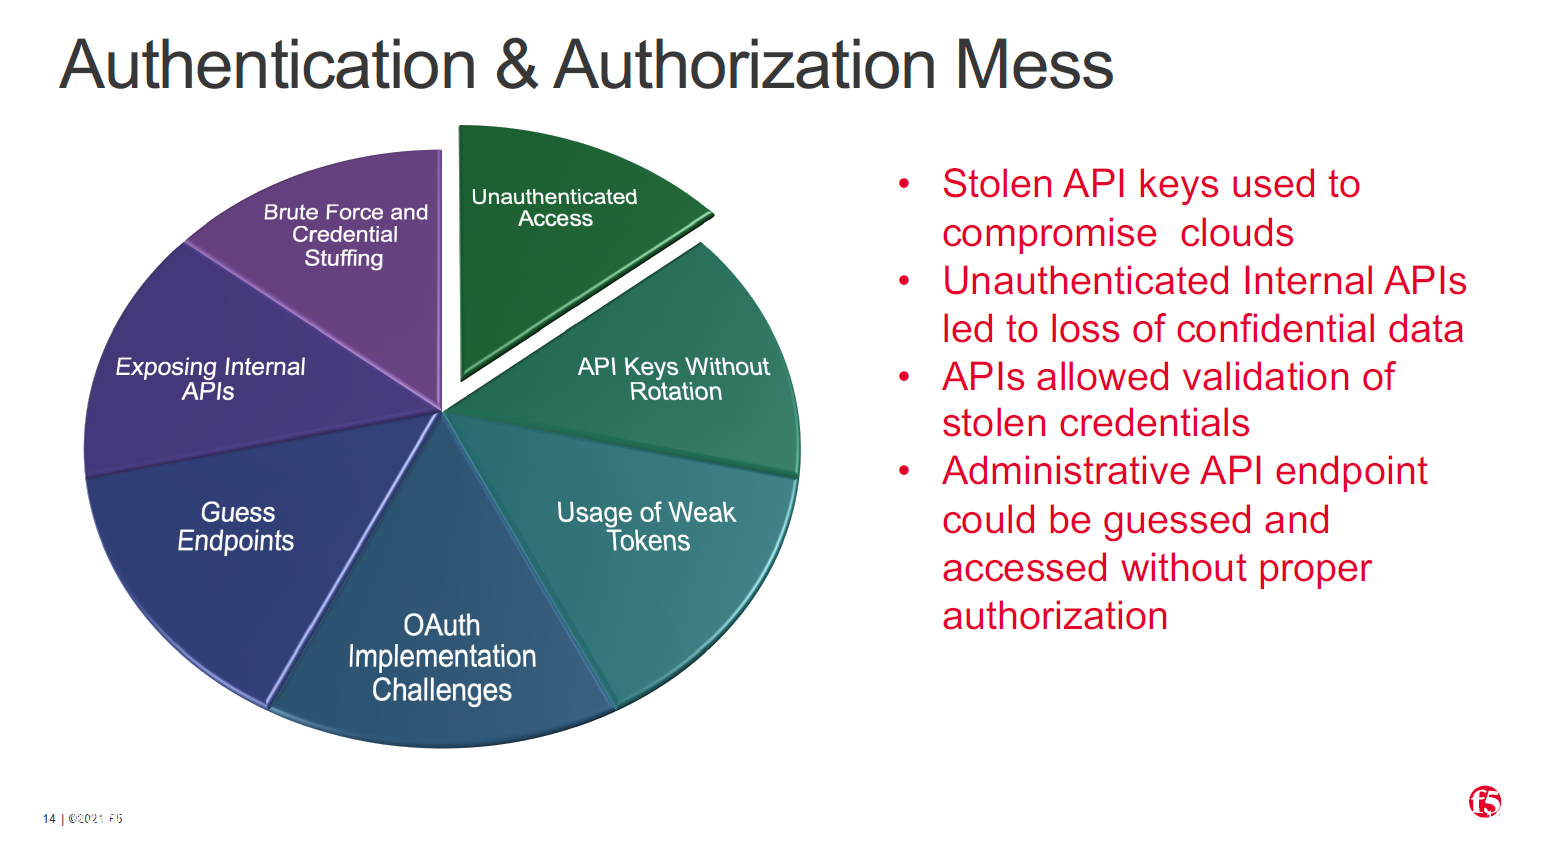 Authentication and Authorisation mess